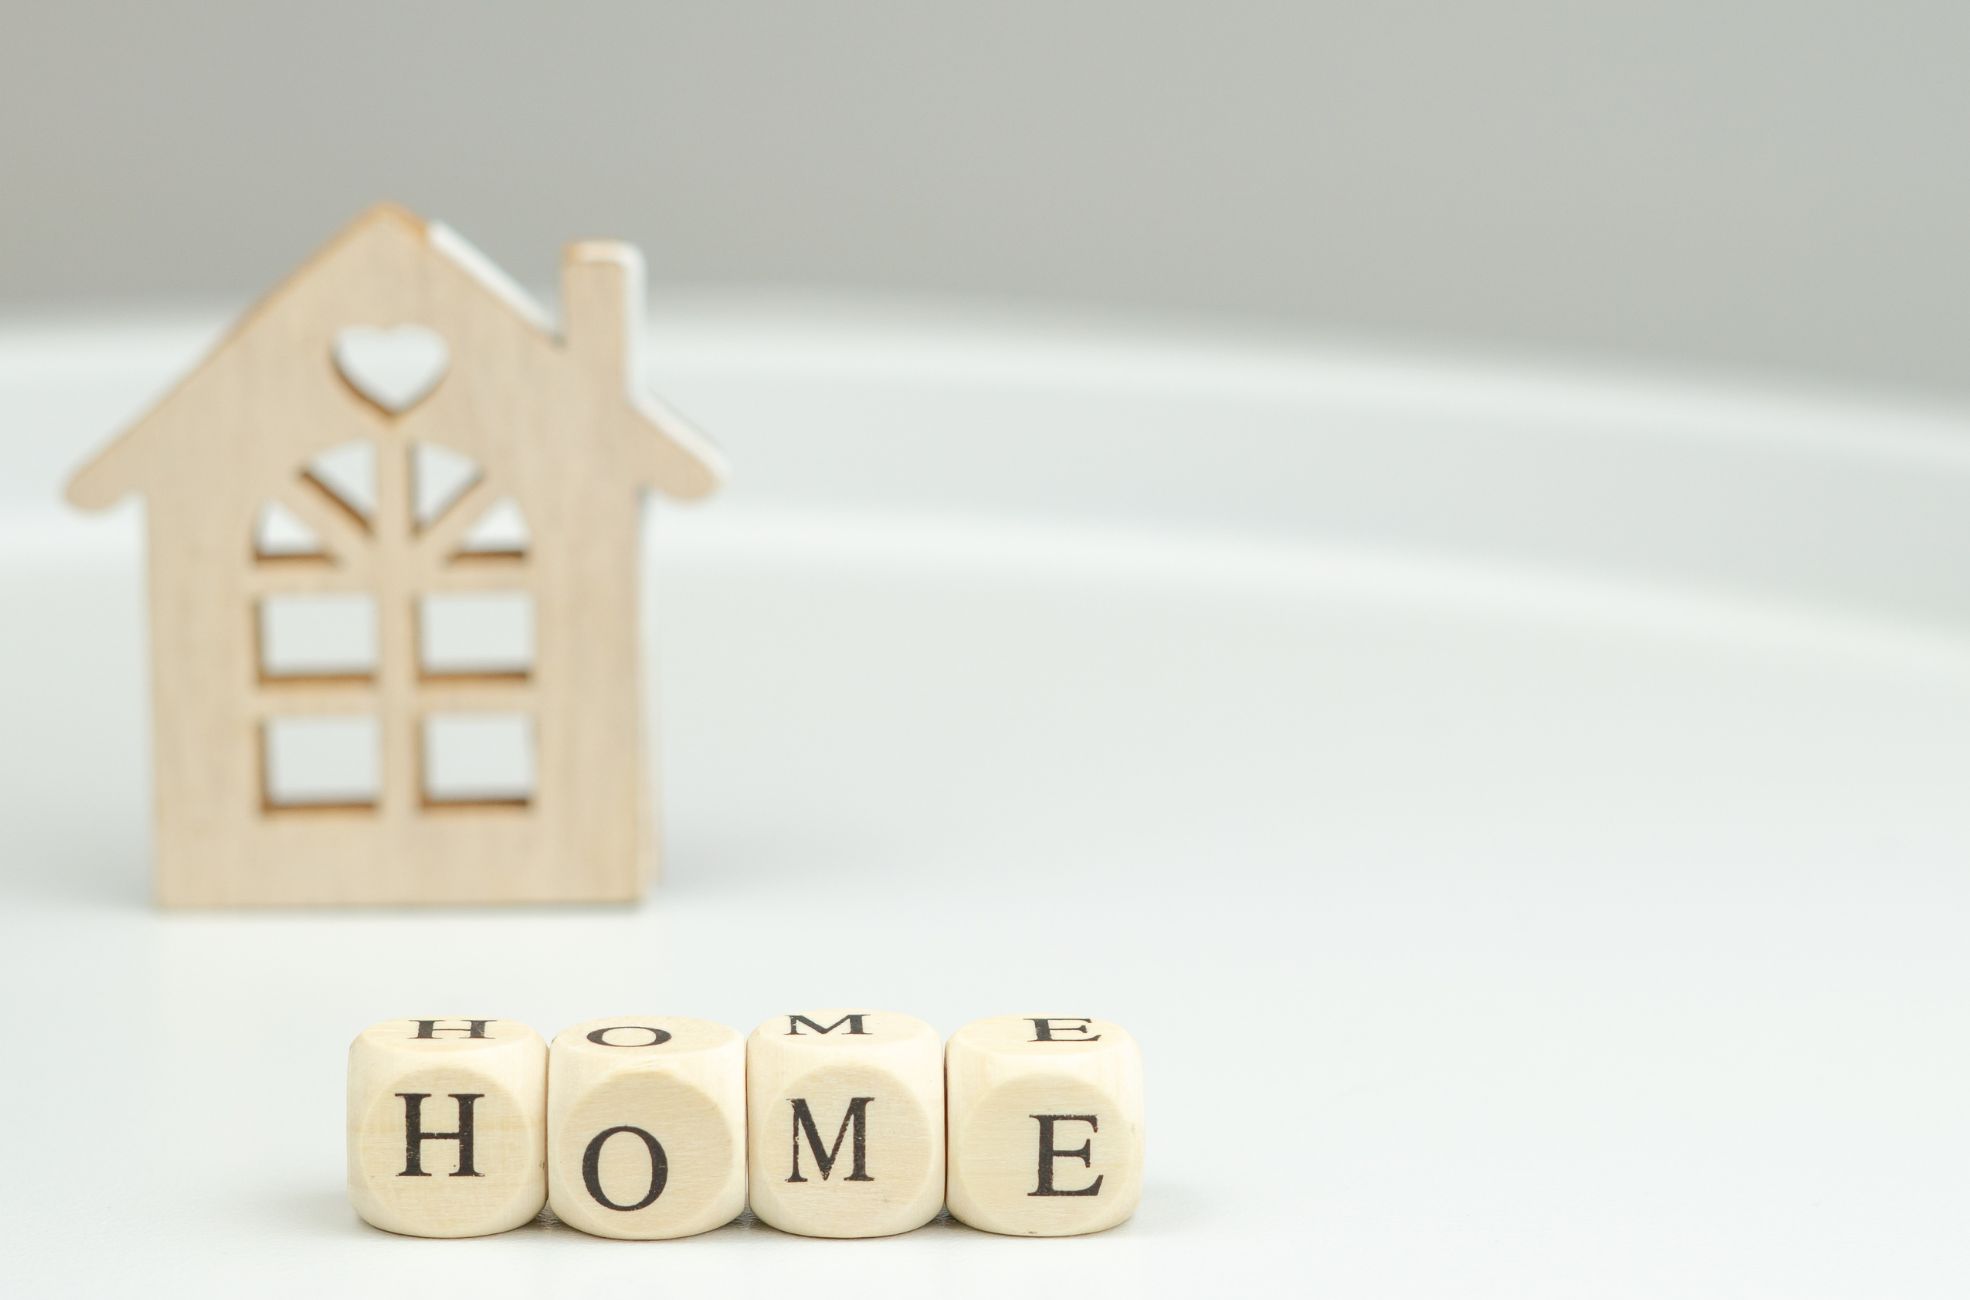 Stock Photo Showing Domicile By Blocks Saying Home And A House